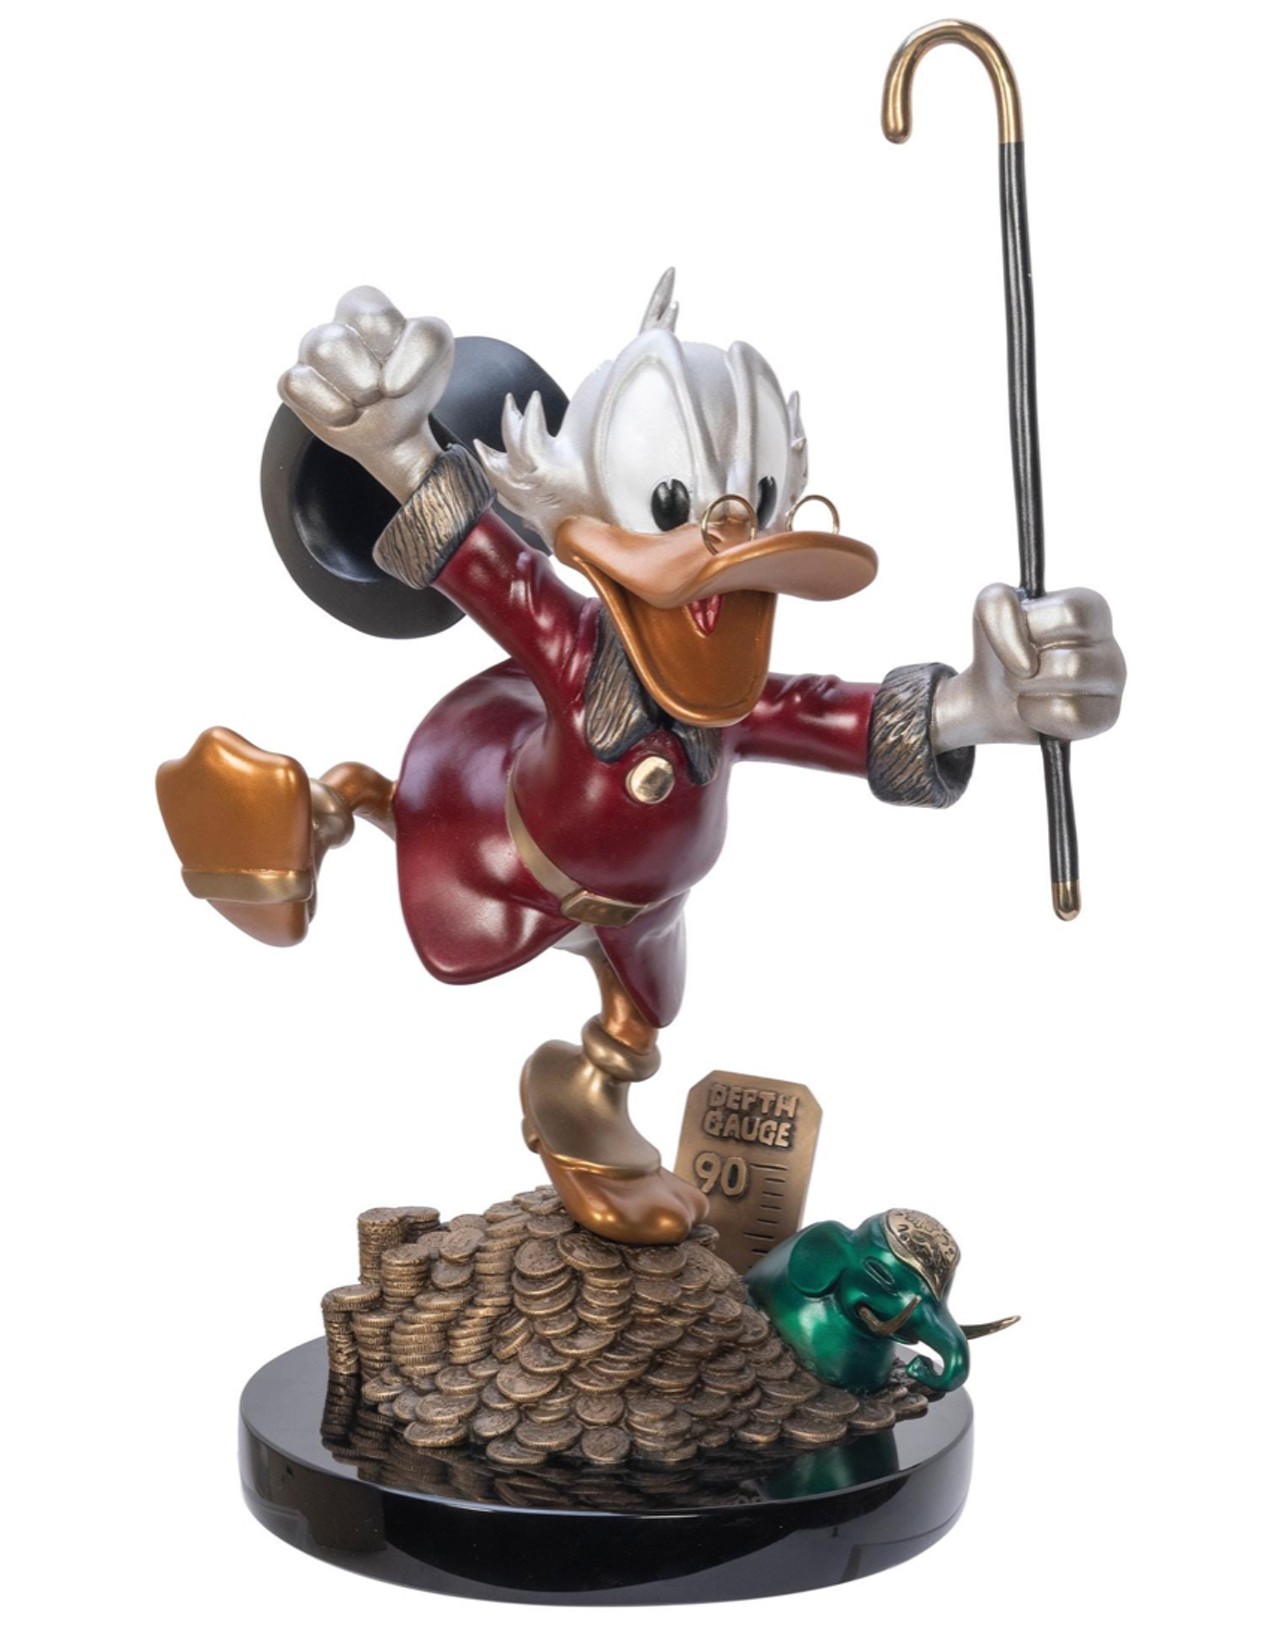 Scrooge McDuck &#147;Hands Off My Playthings&#148; bronze sculpture
Estimated Sale Price: $6,000-8,000 
This 15&#148; tall piece features the miserly bird standing atop a pile of gold coins with cane raised, ready to fight off anyone who comes too close to his money.